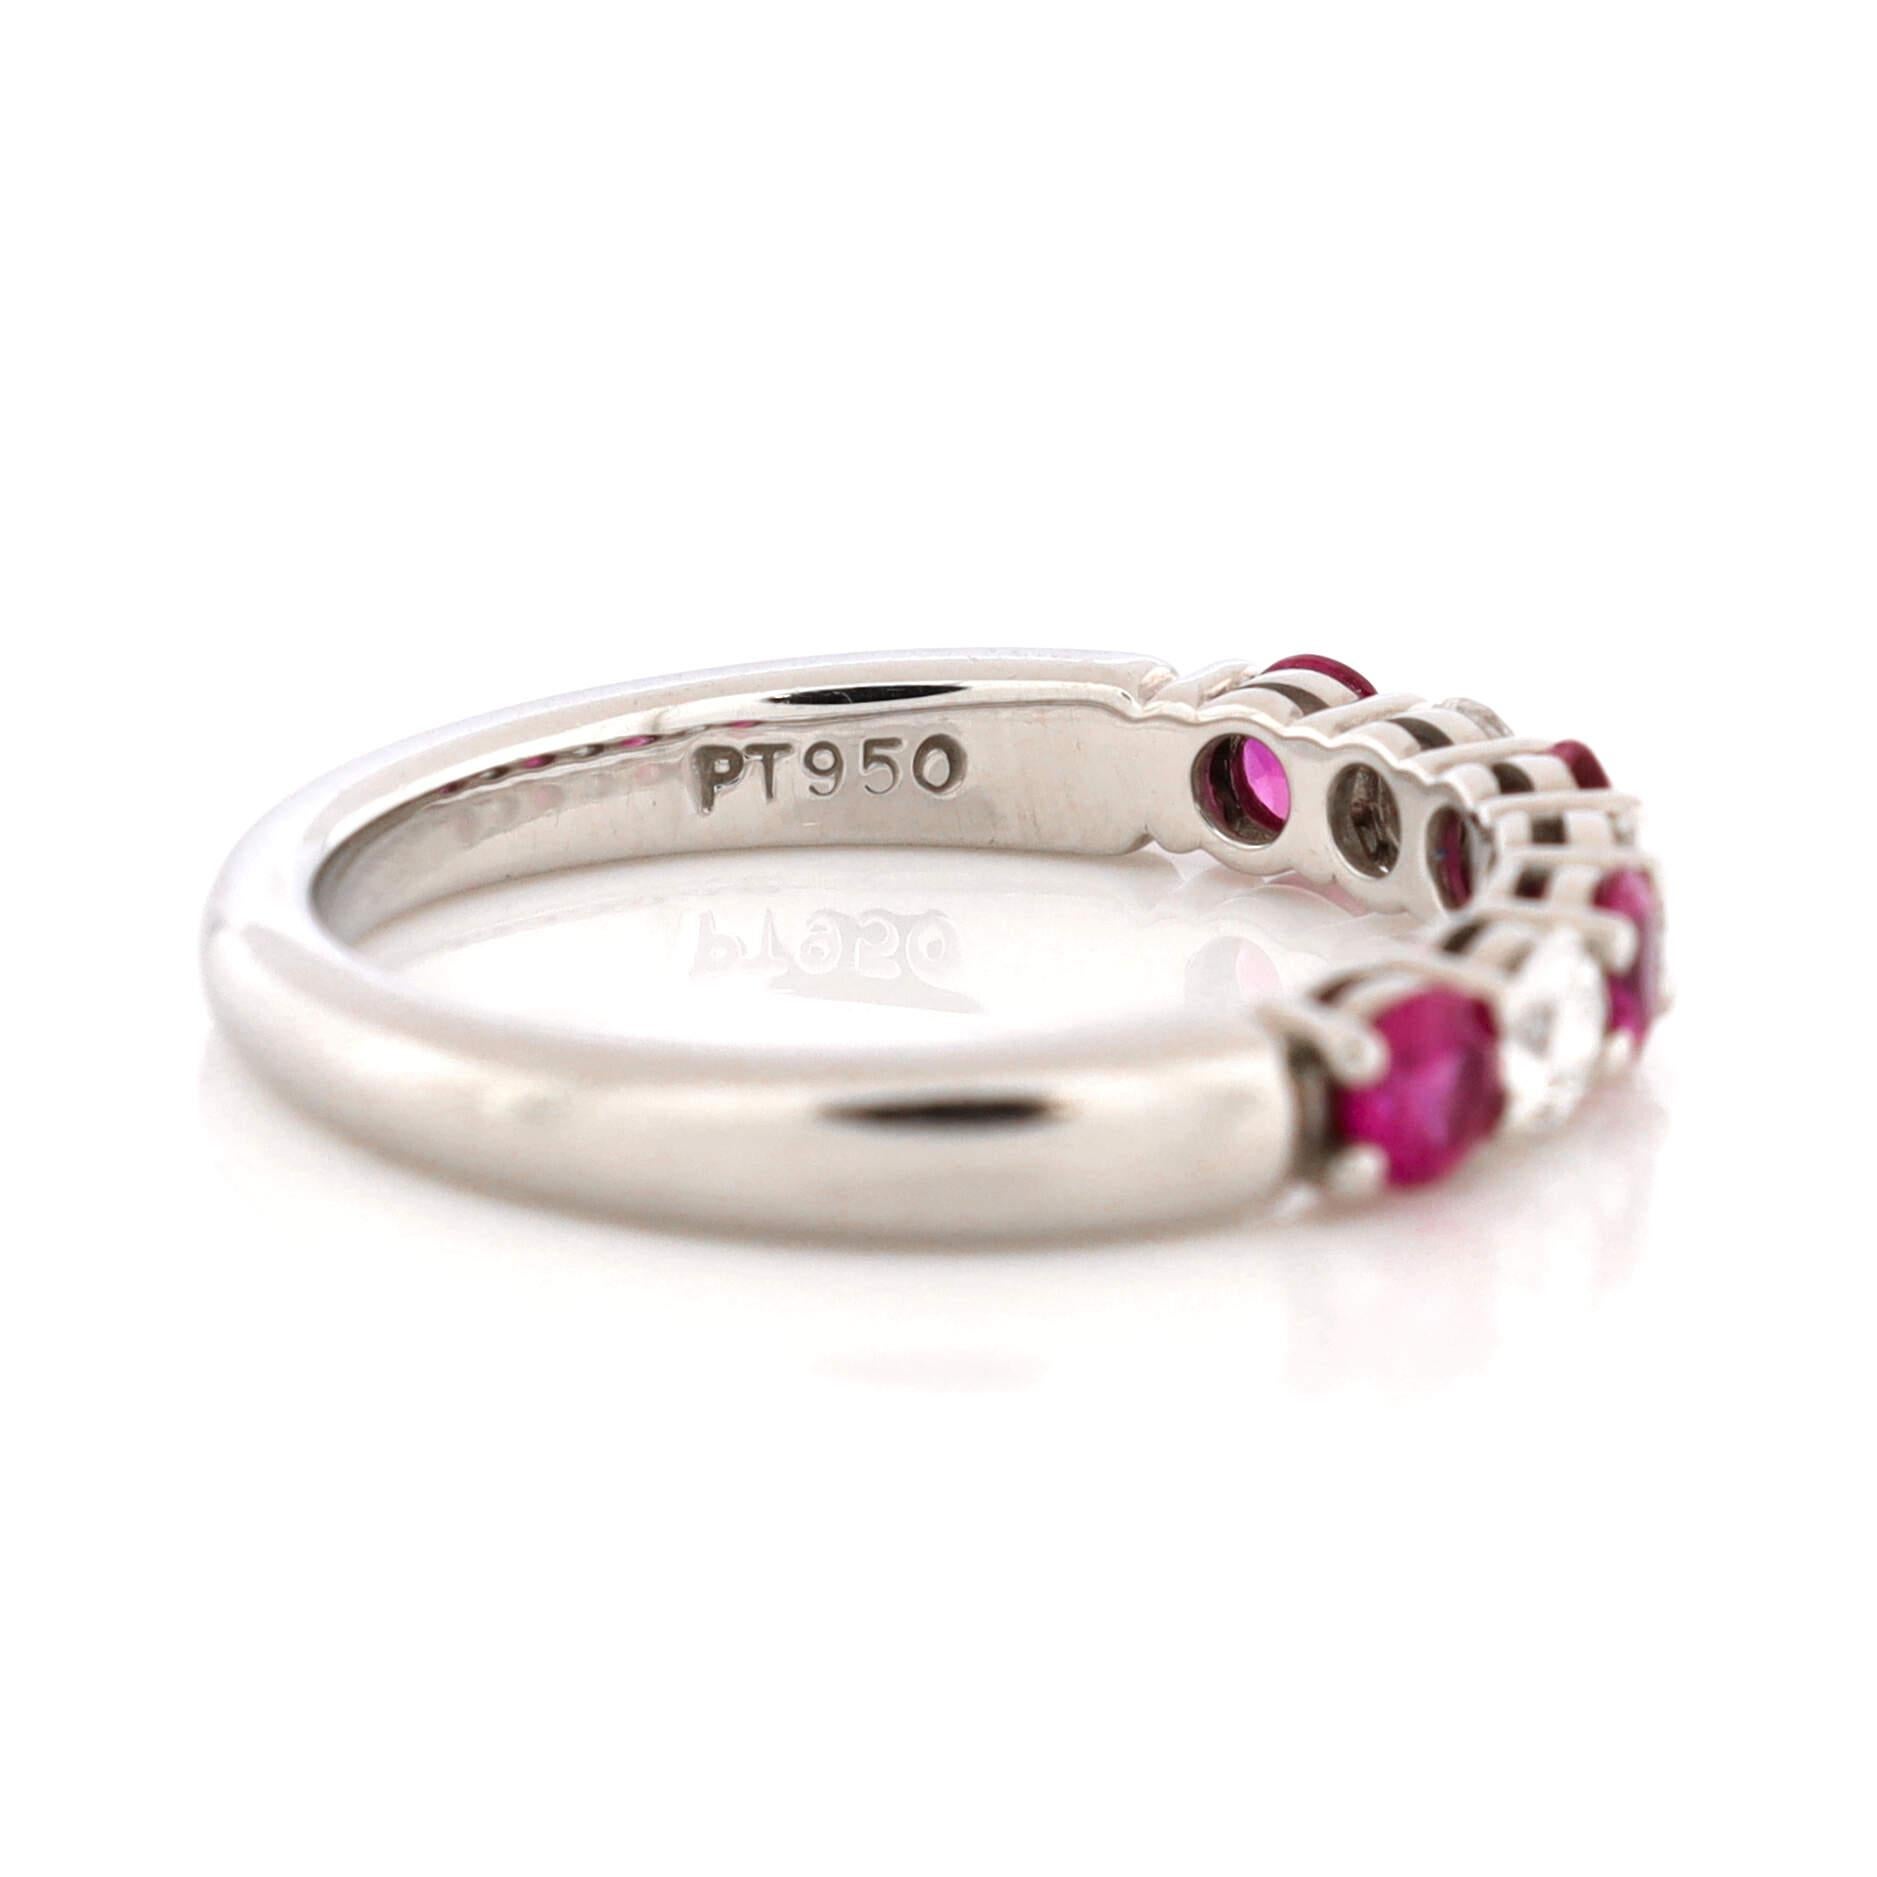 Women's Tiffany & Co. Half Embrace Band Ring Platinum with Diamonds and Pink Sapphires